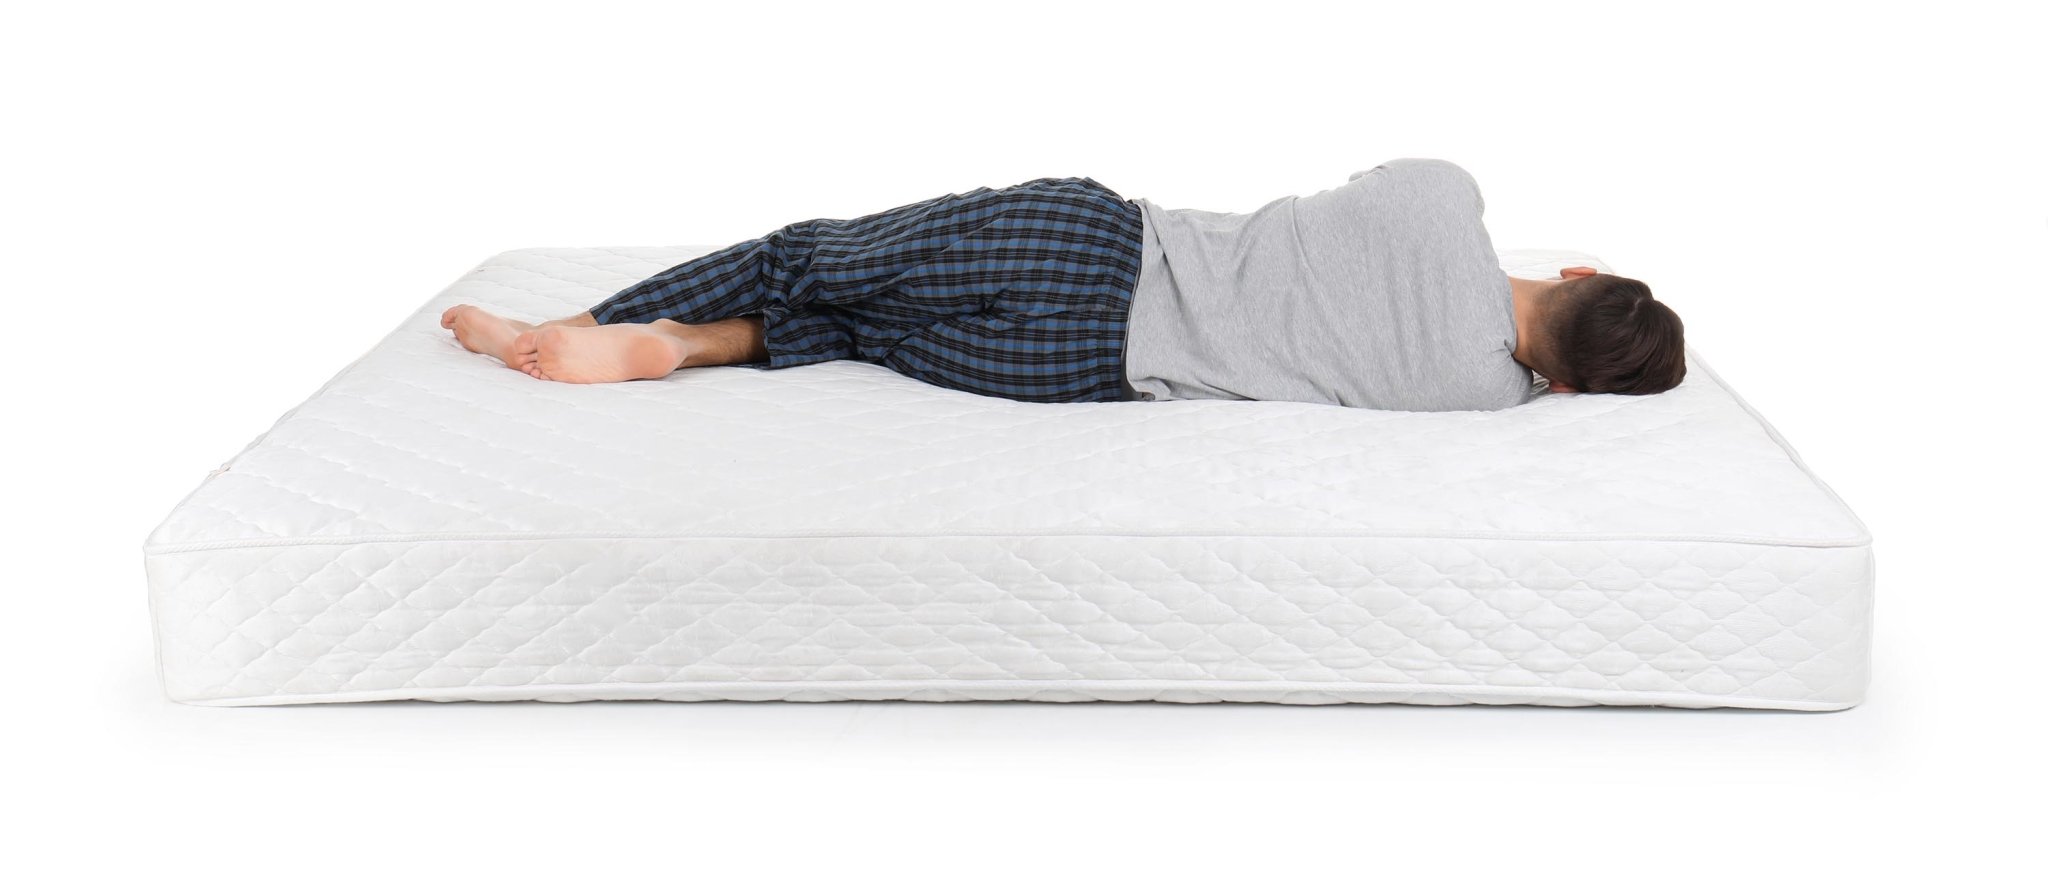 Benefits Of A Mattress Topper - Everything You Need To Know!